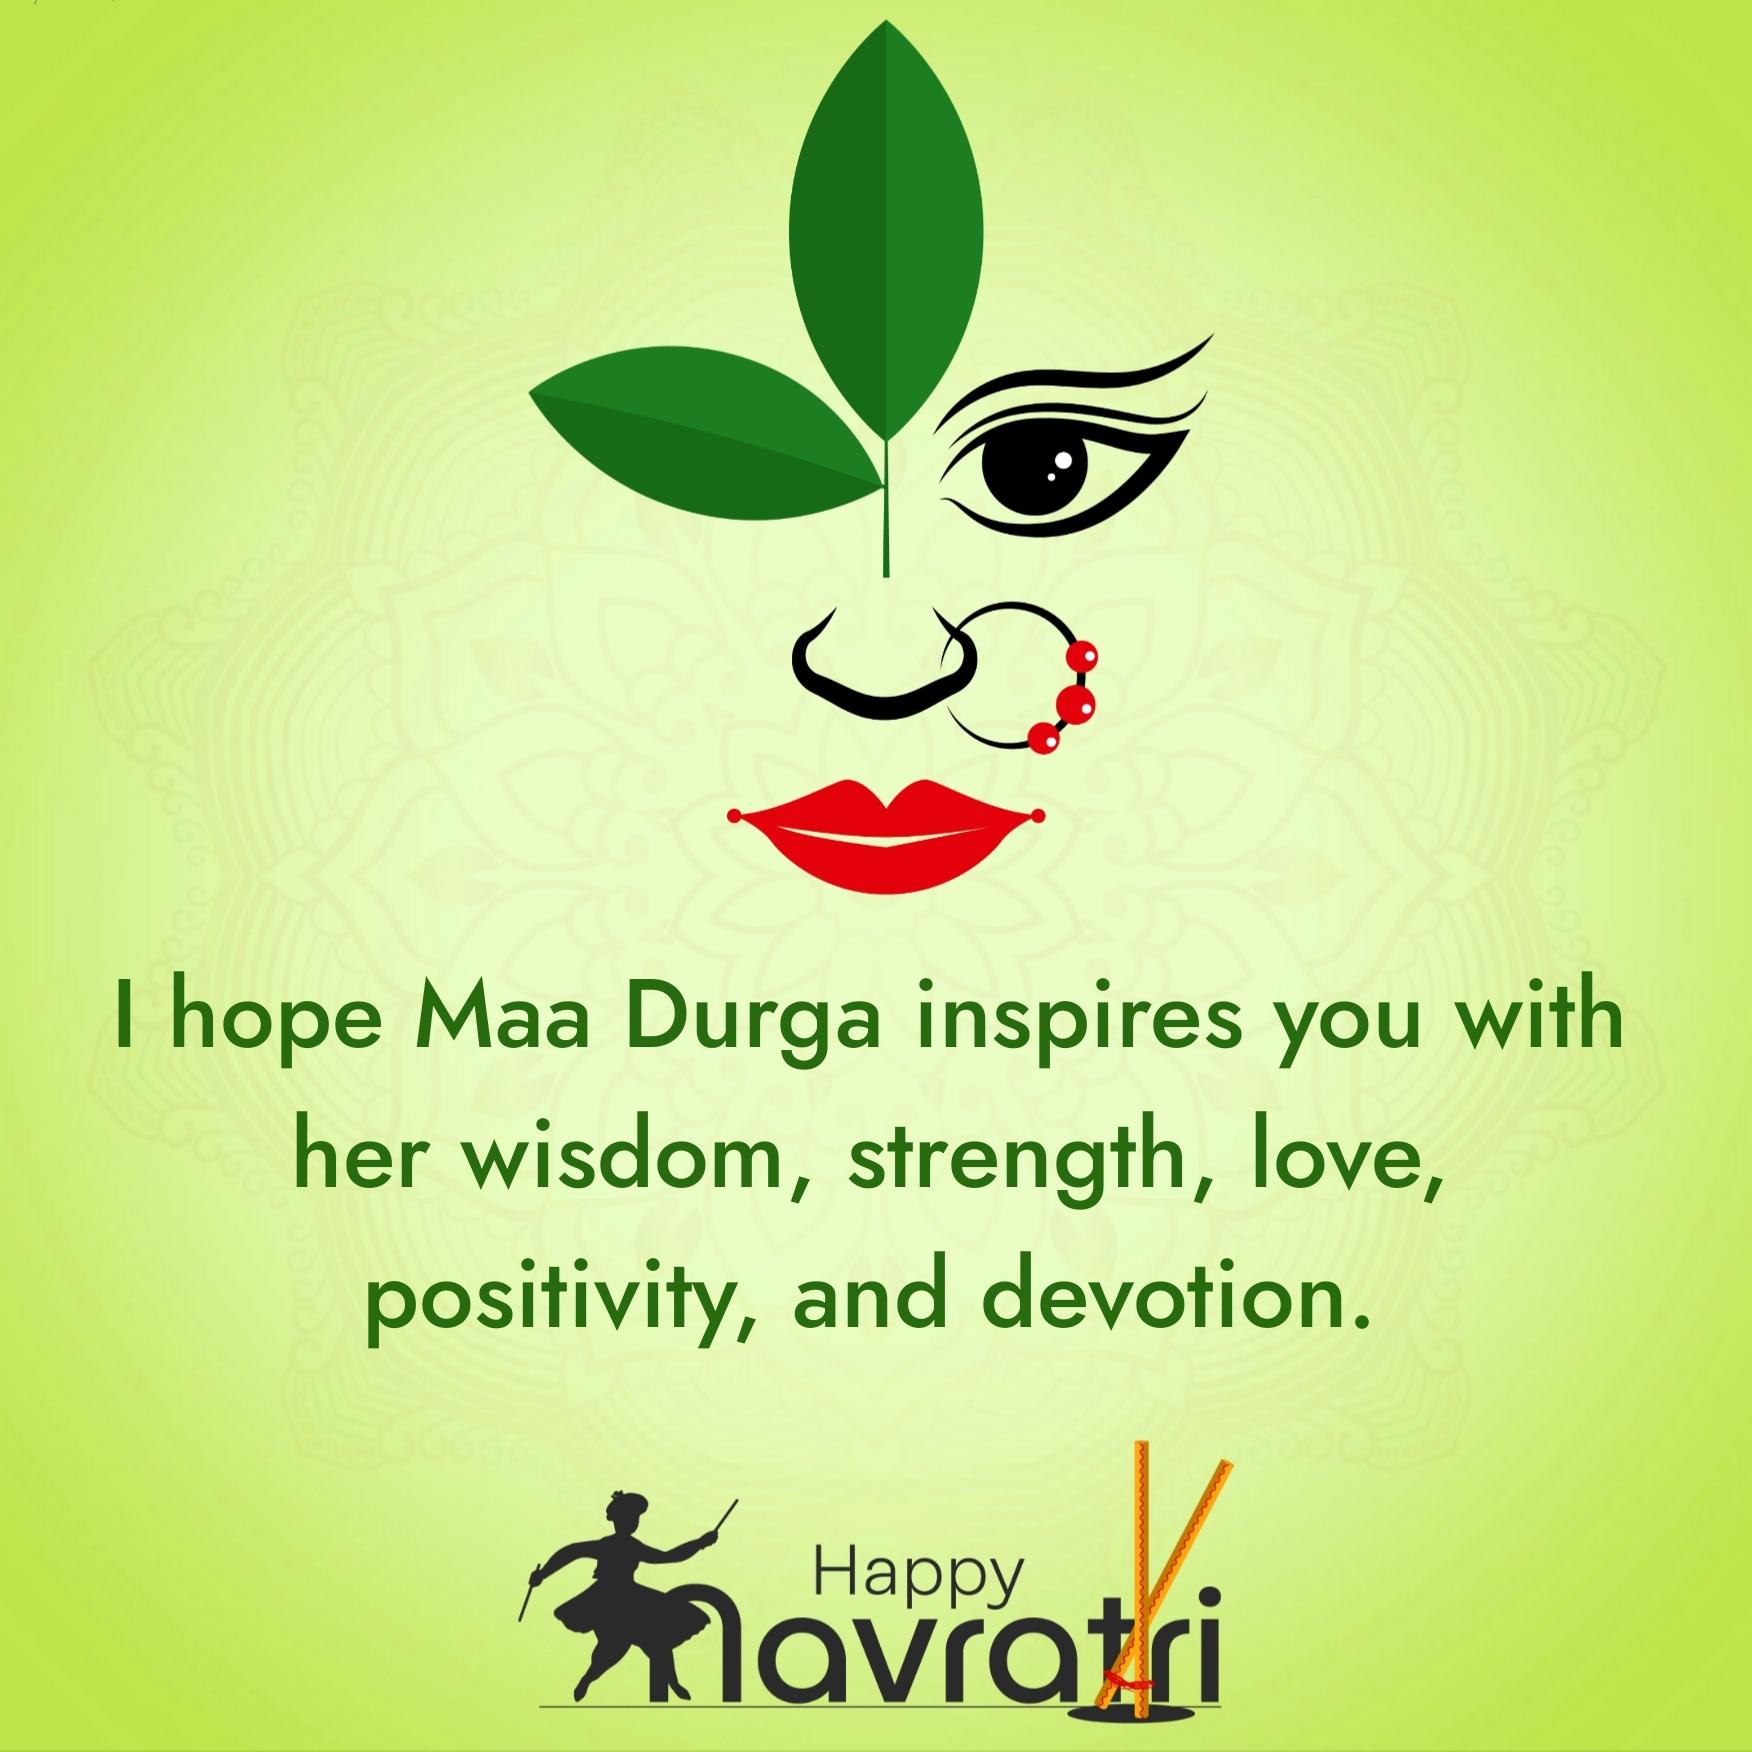 I hope Maa Durga inspires you with her wisdom